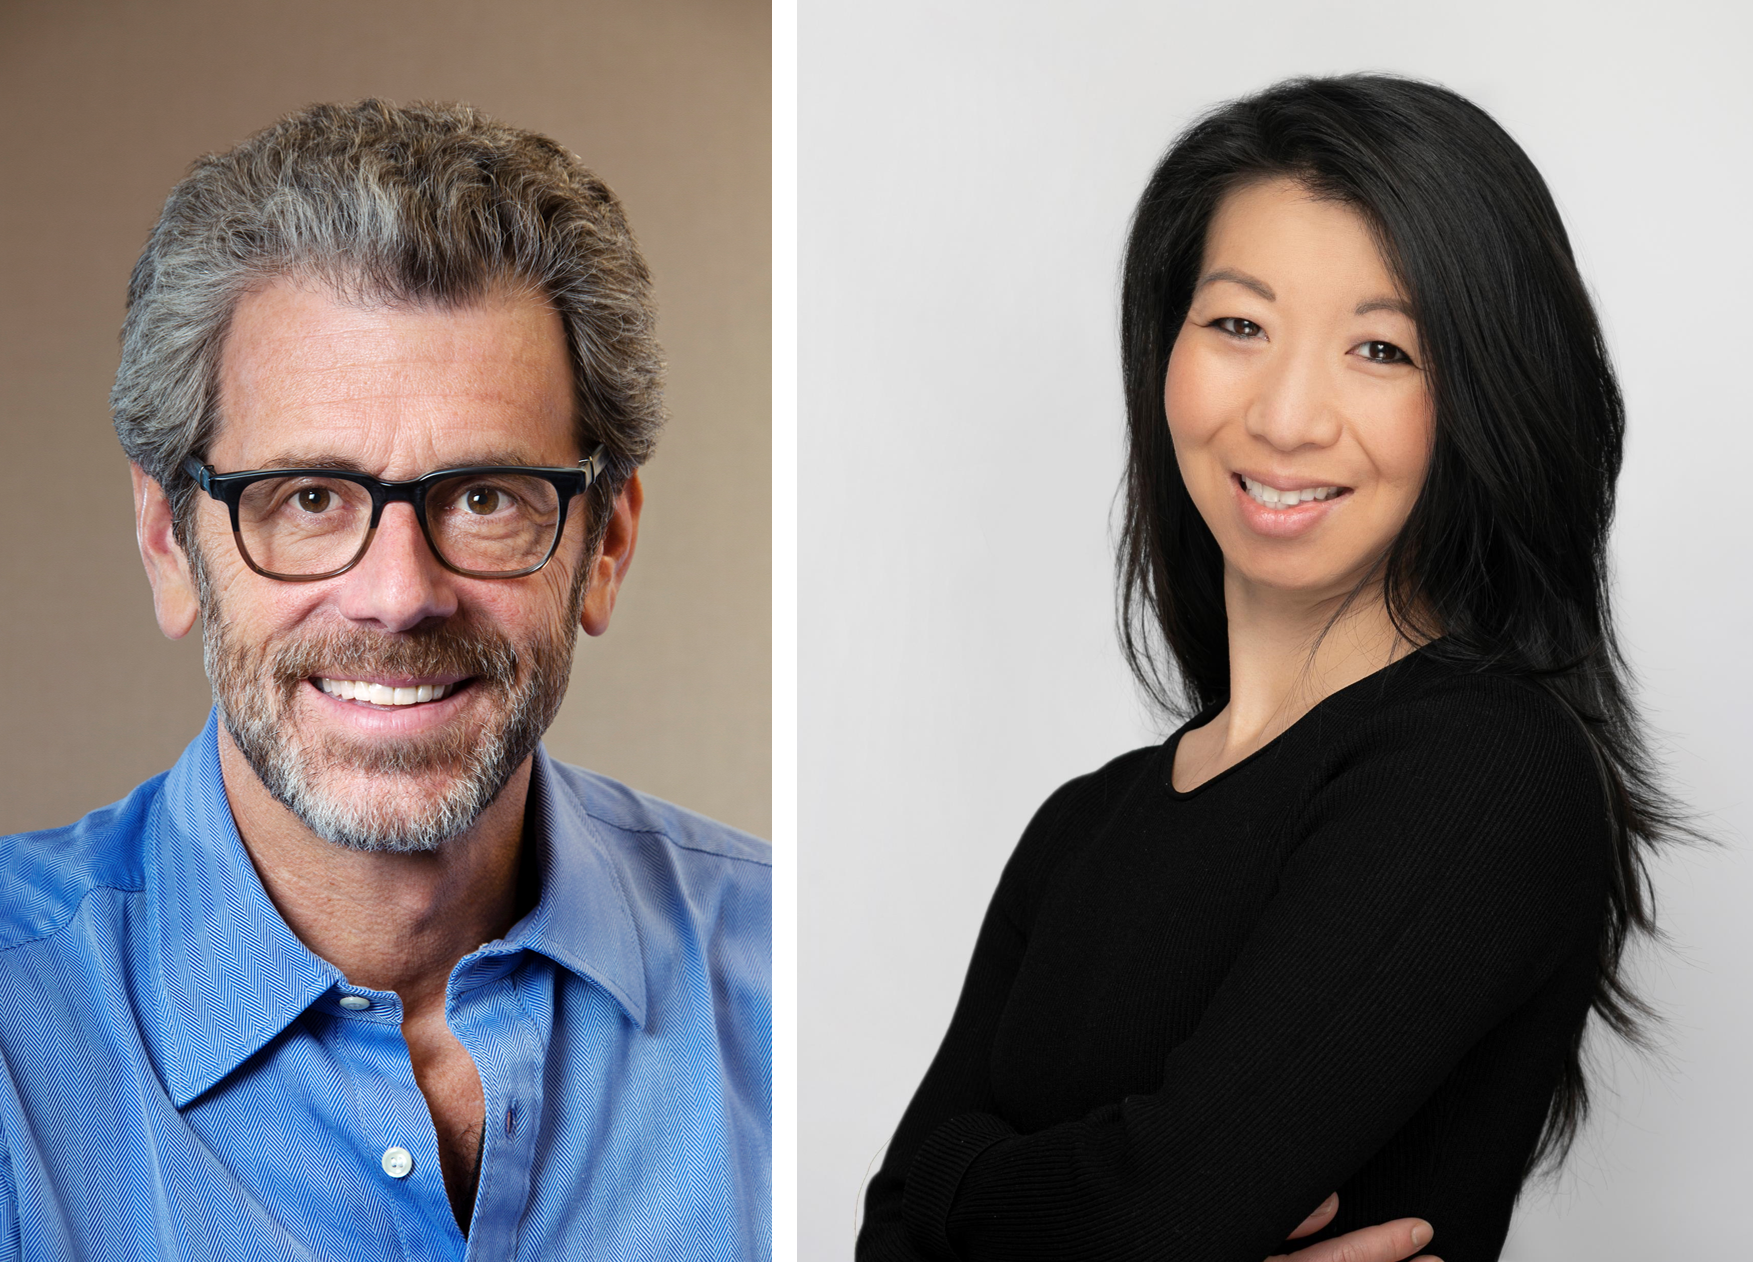 ESRT's CEO Tony Malkin and Chief Operating Officer Christina Chiu named to Commercial Observer’s Power 100 List